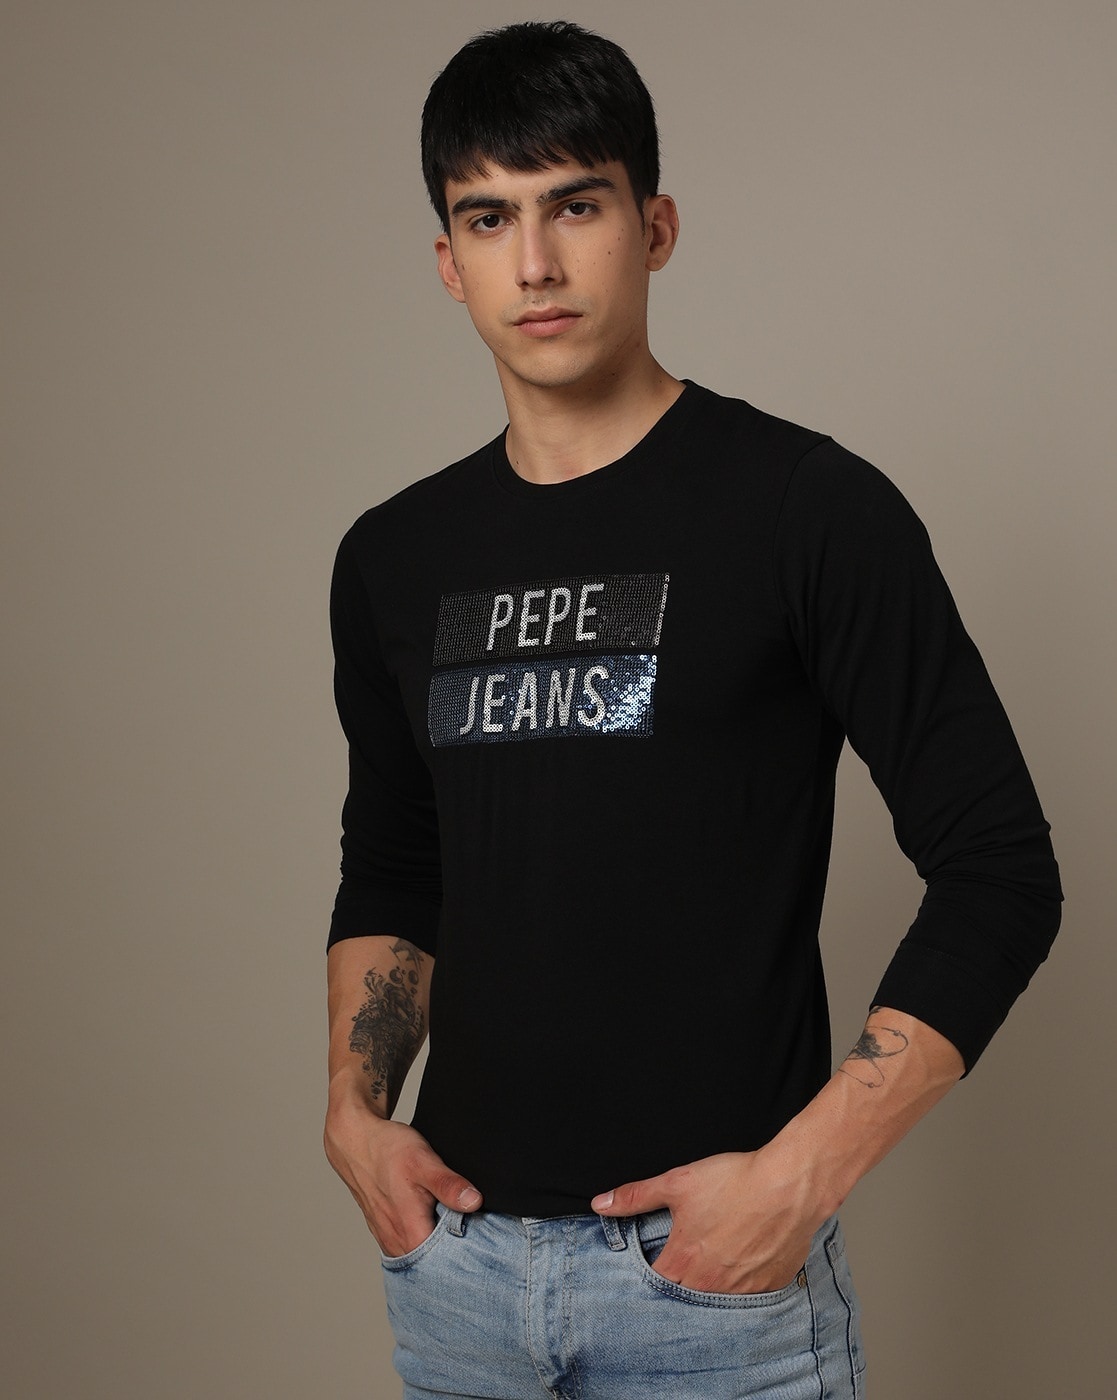 Tshirts Online by for Buy Jeans Black Men Pepe